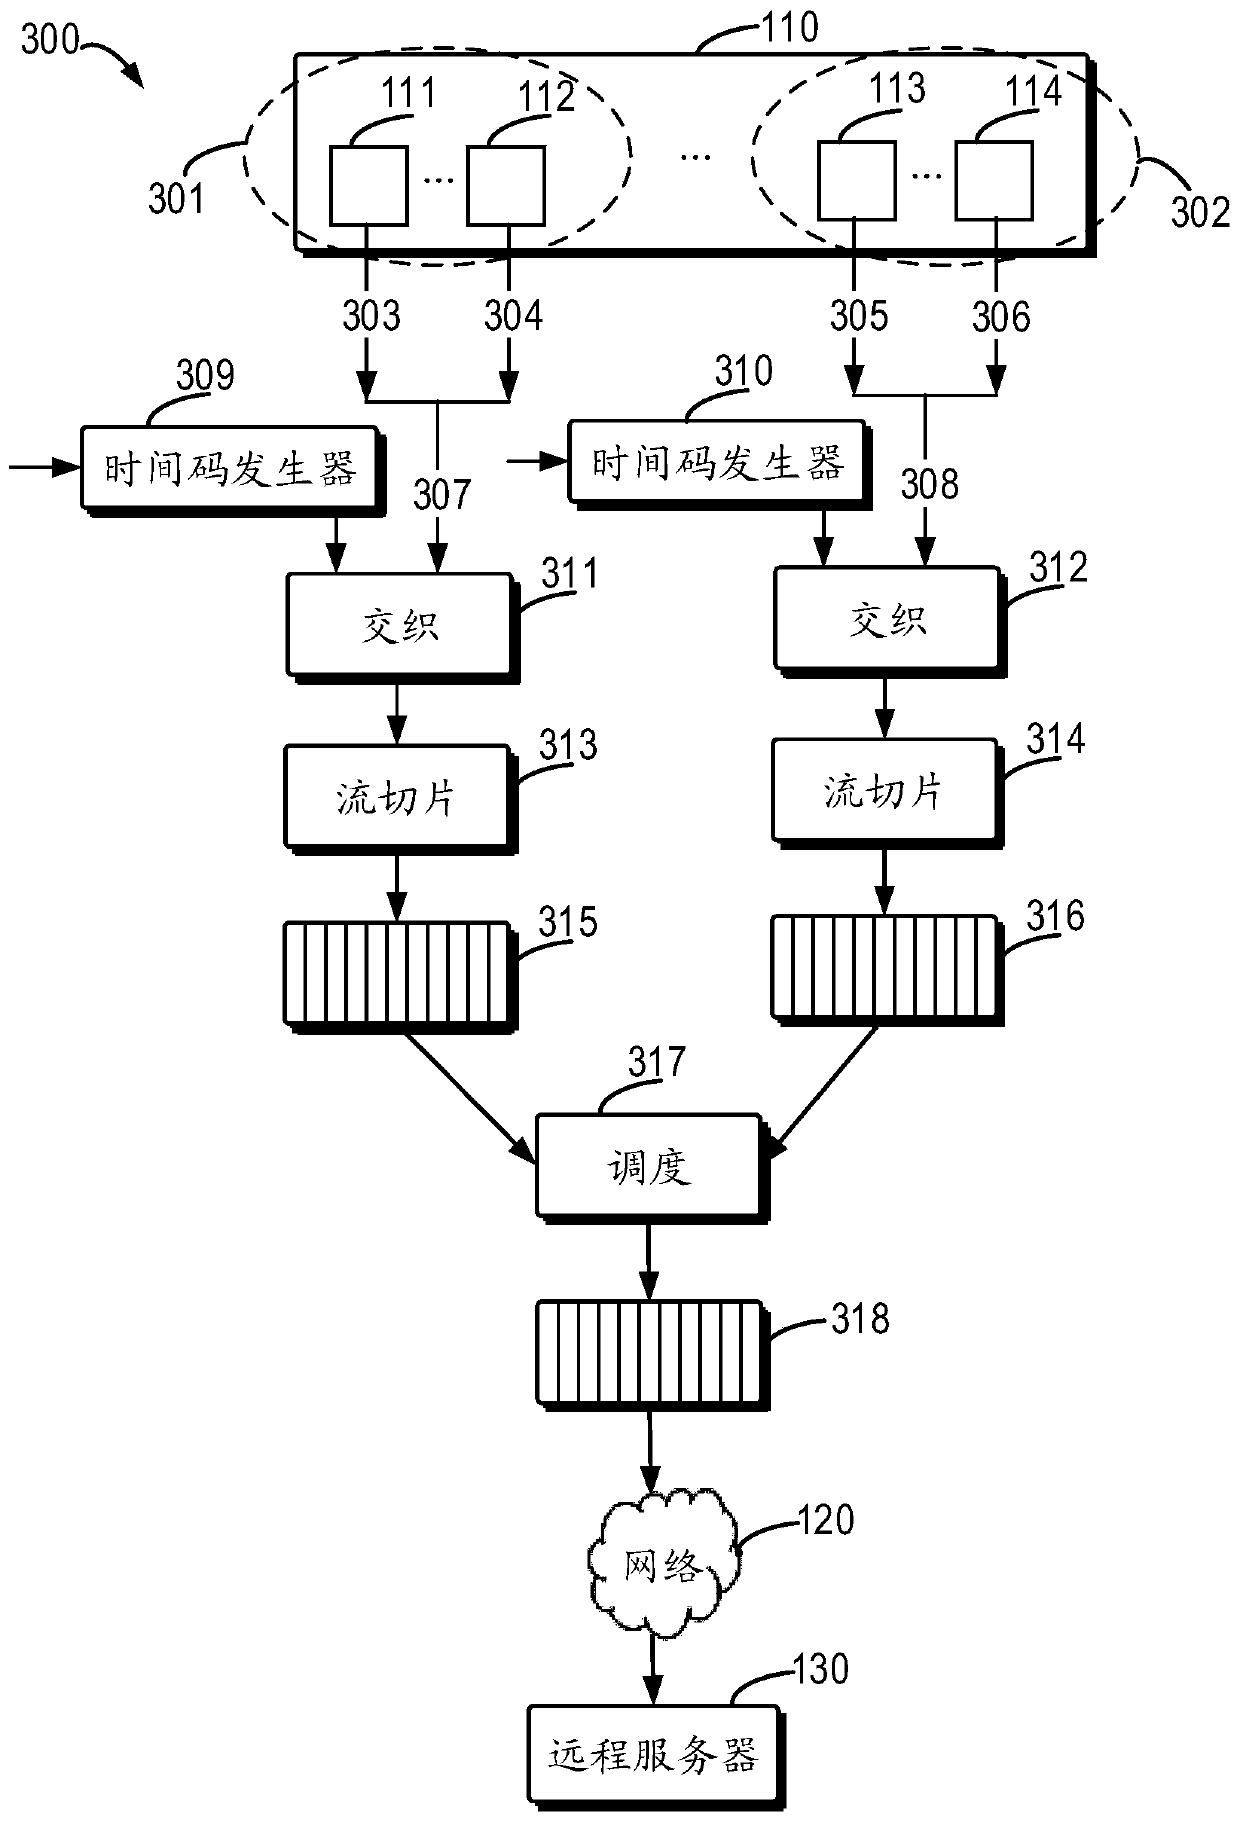 Signal processing method, electronic equipment and computer readable storage medium